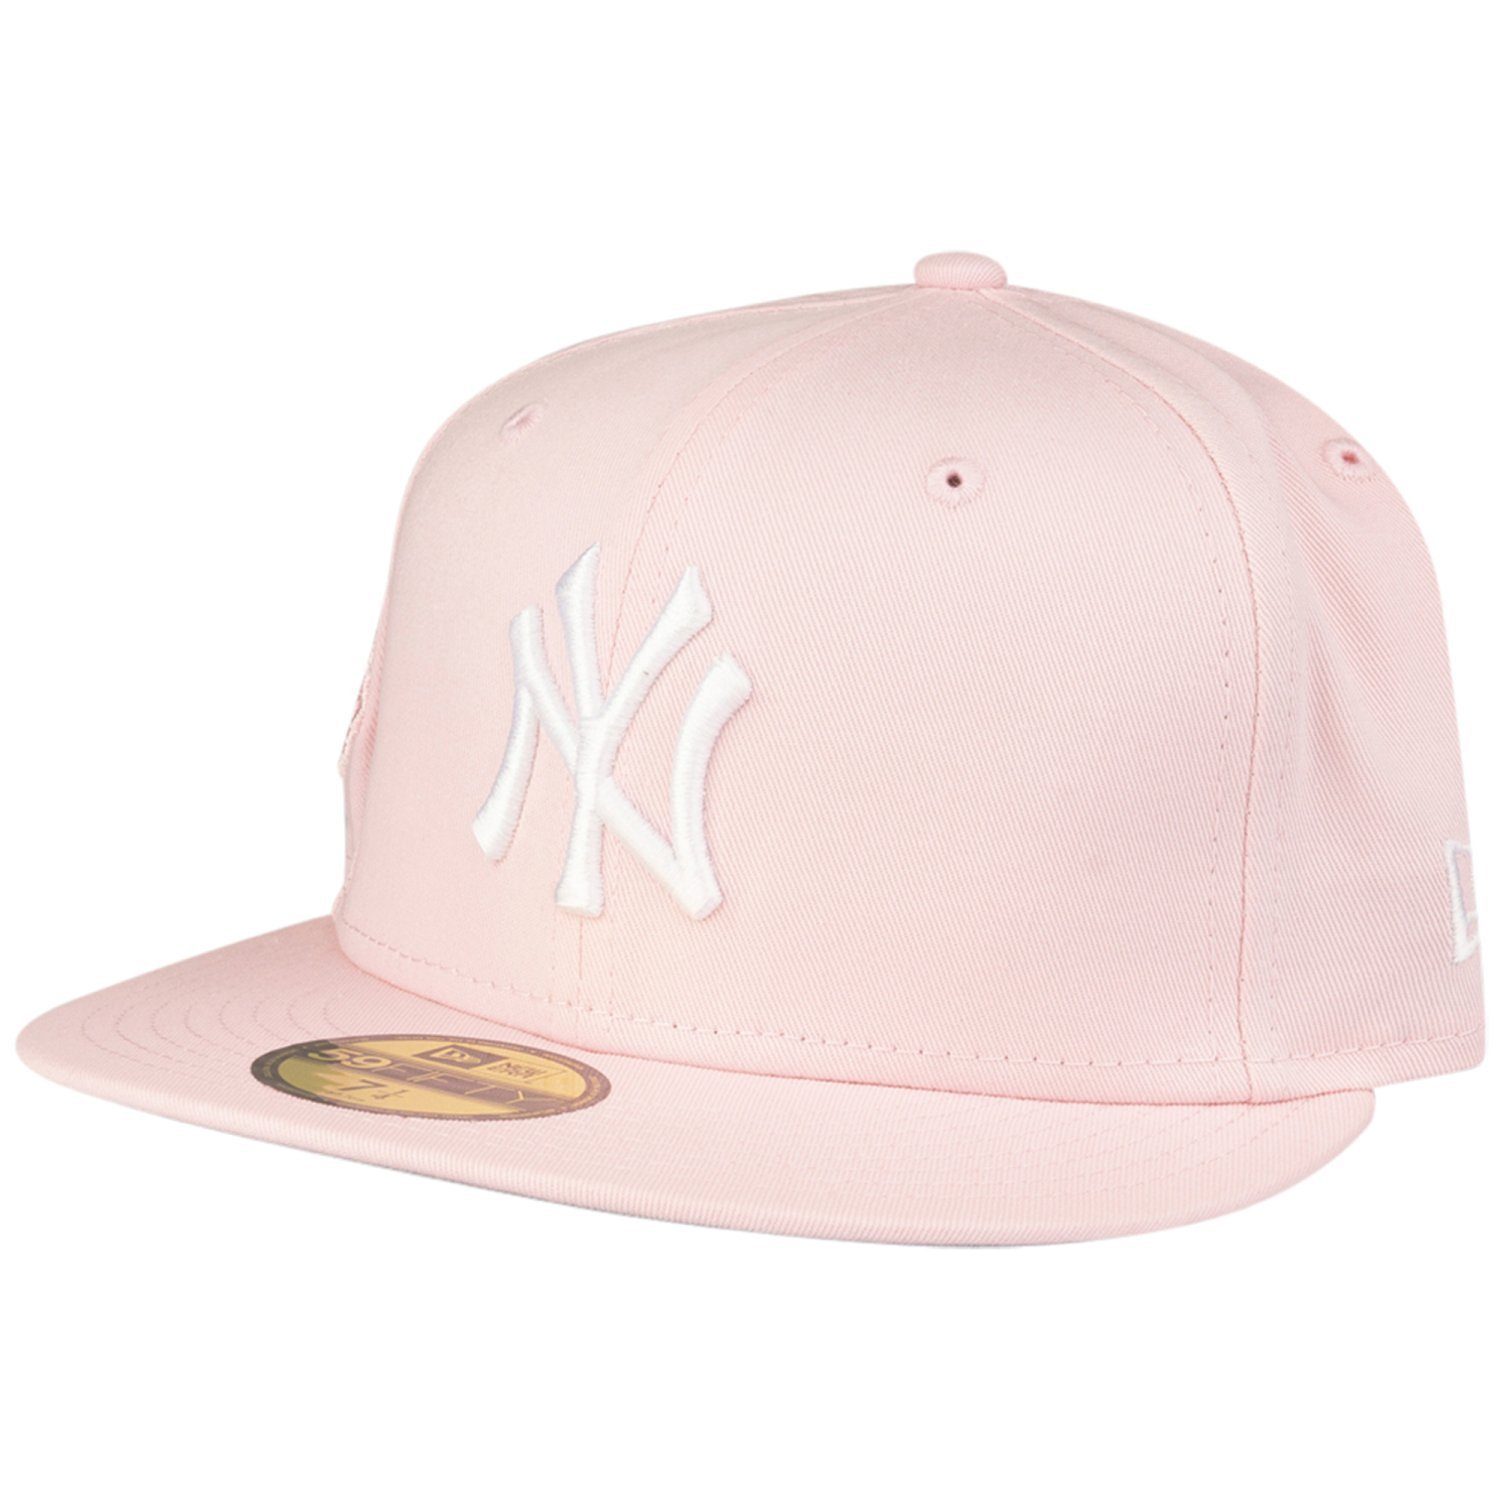 100 Cap NY New Yankees 59Fifty ANNIVERSARY Era Fitted